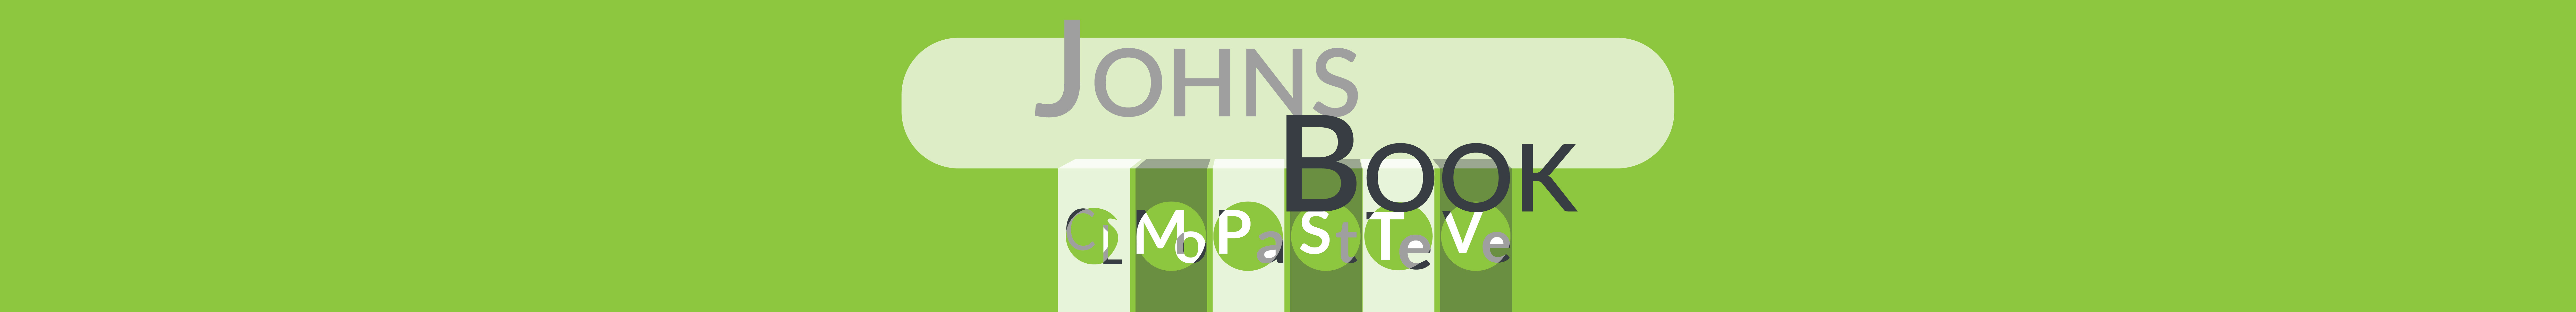 Johns Book's profile banner